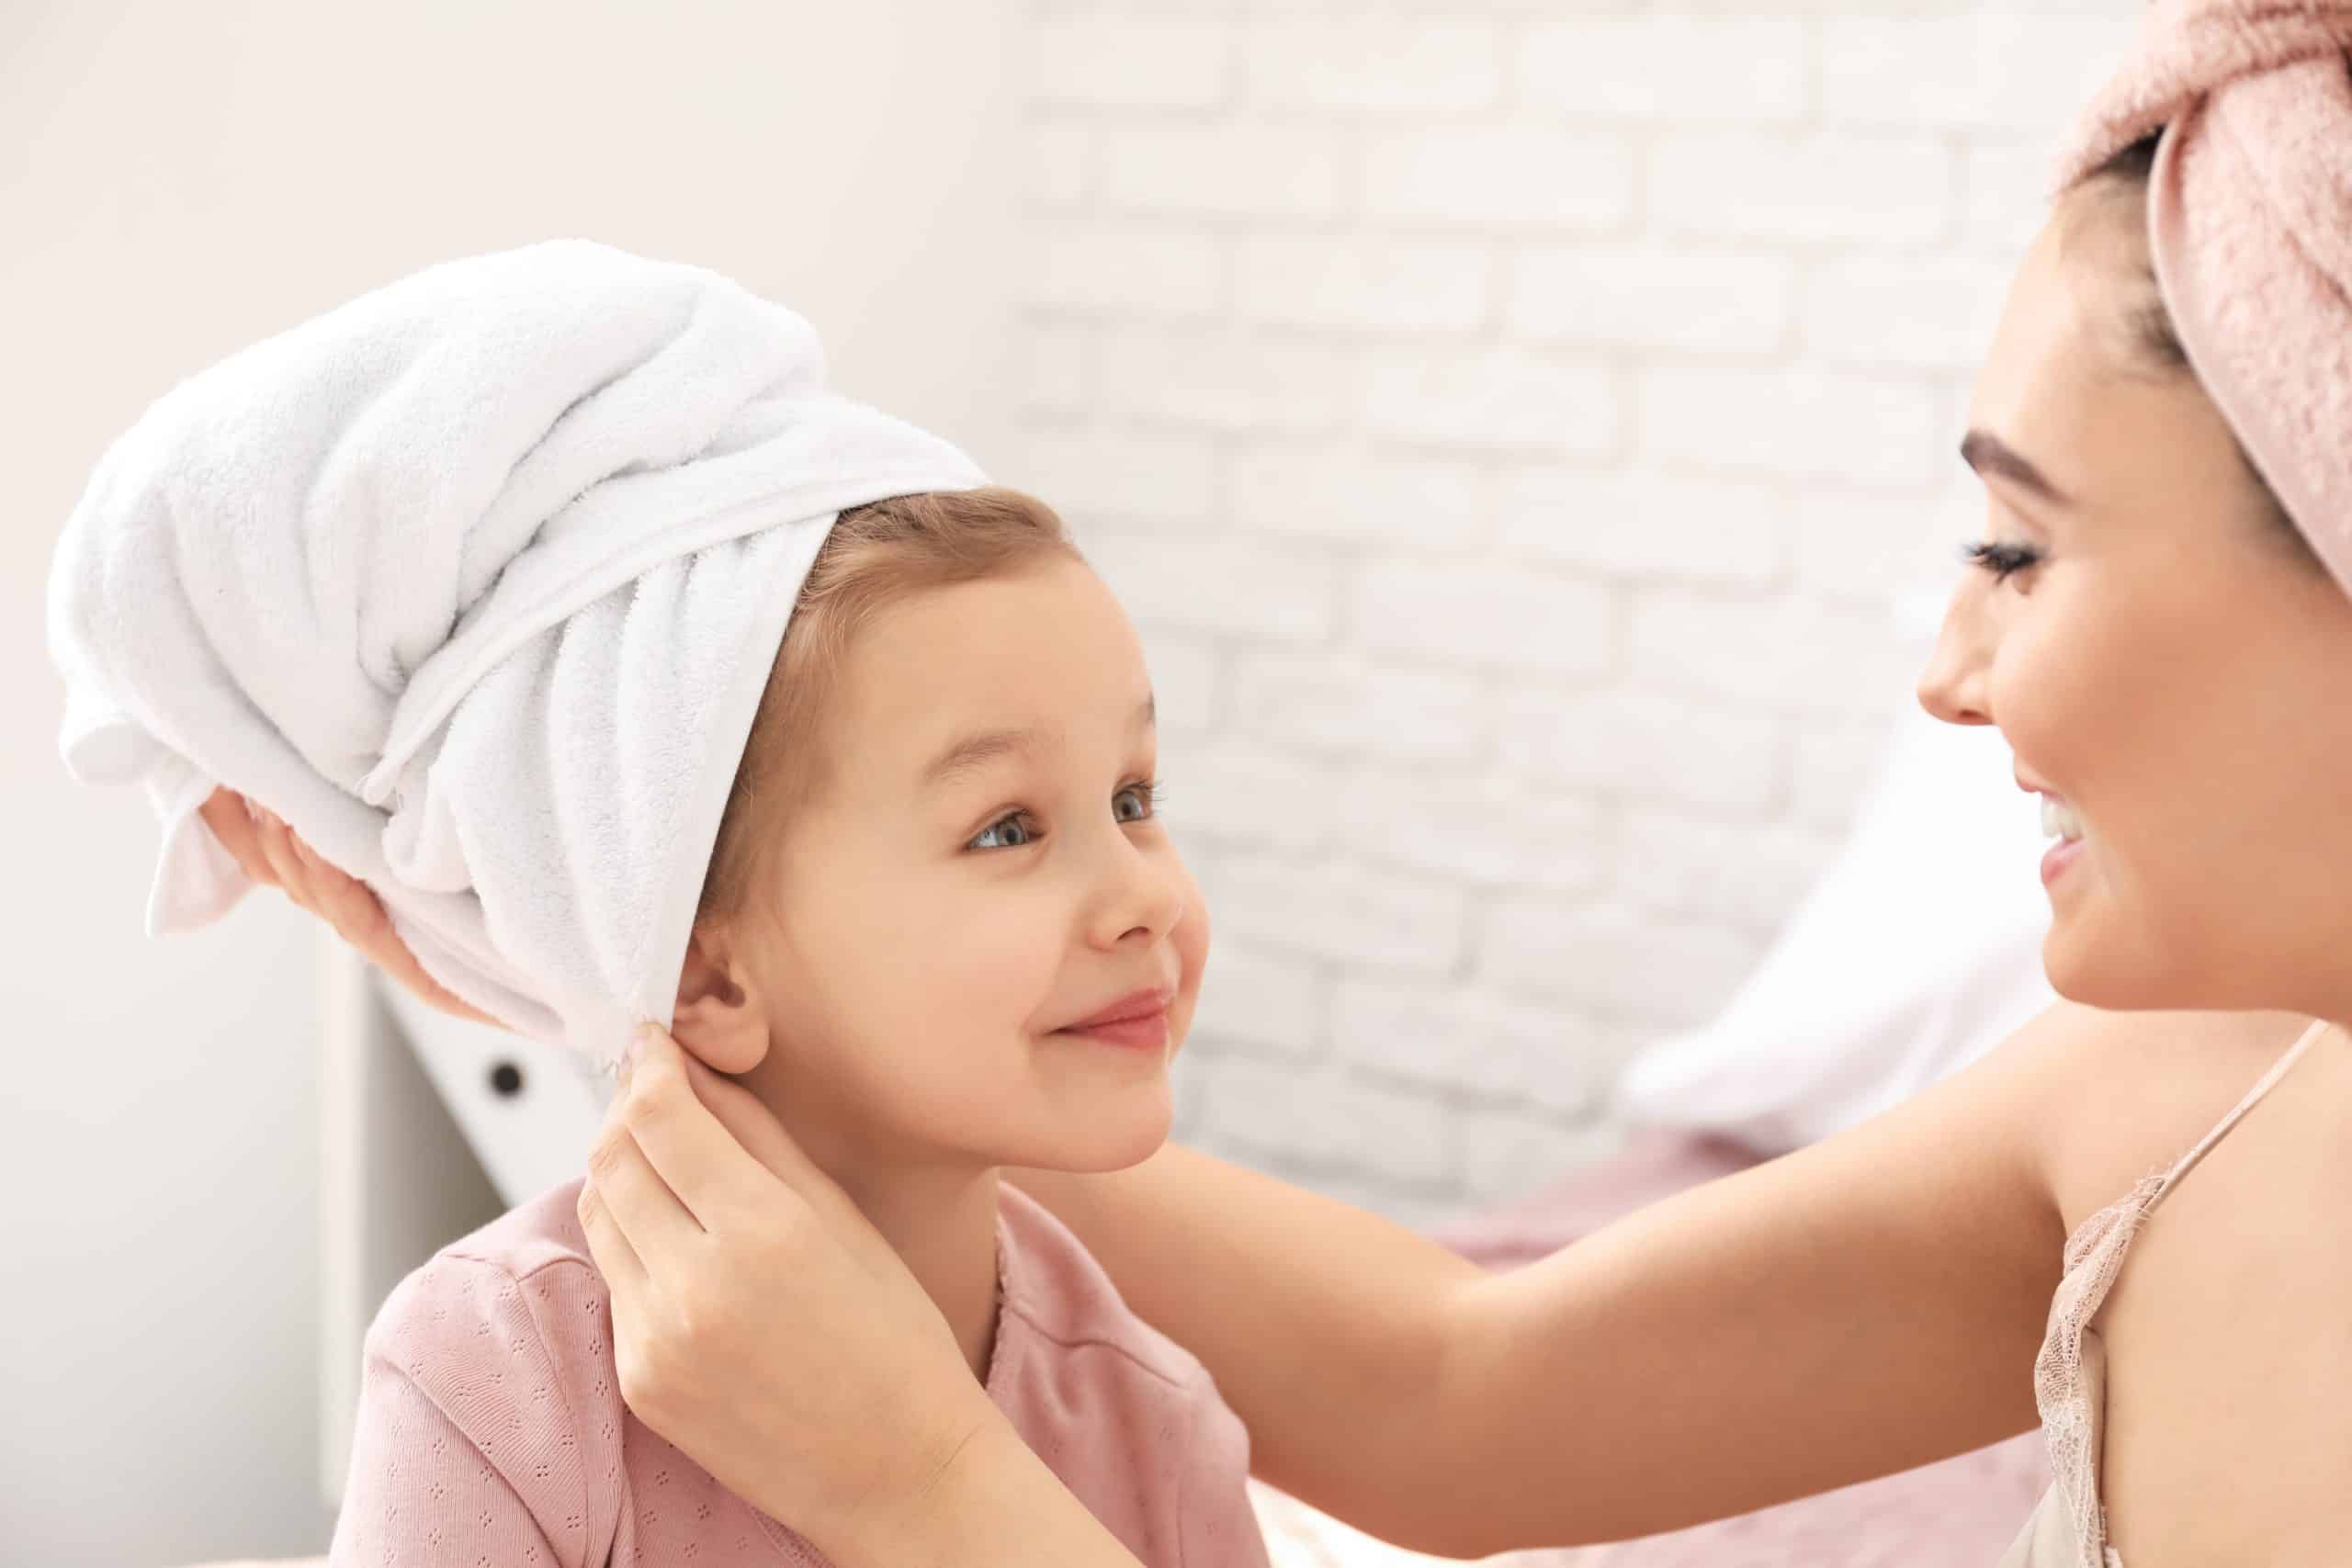 Shampoo for baby – which one to use?